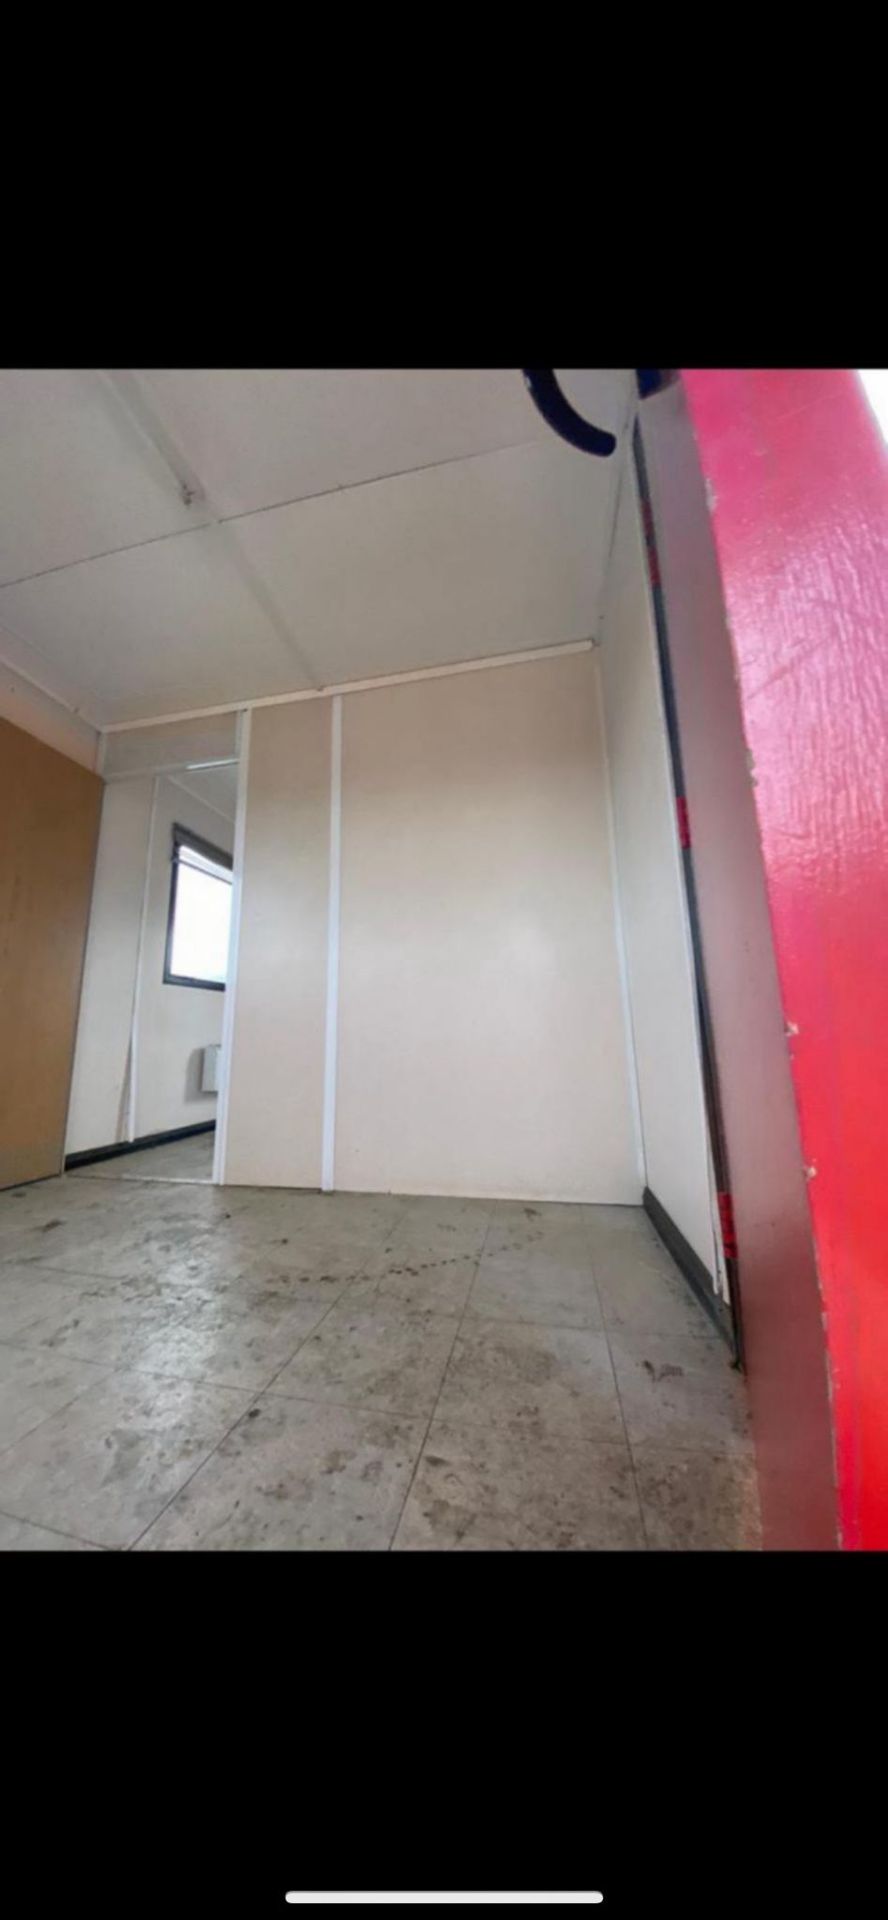 2 x 20ft site offices cabins welfare containers - Image 5 of 6